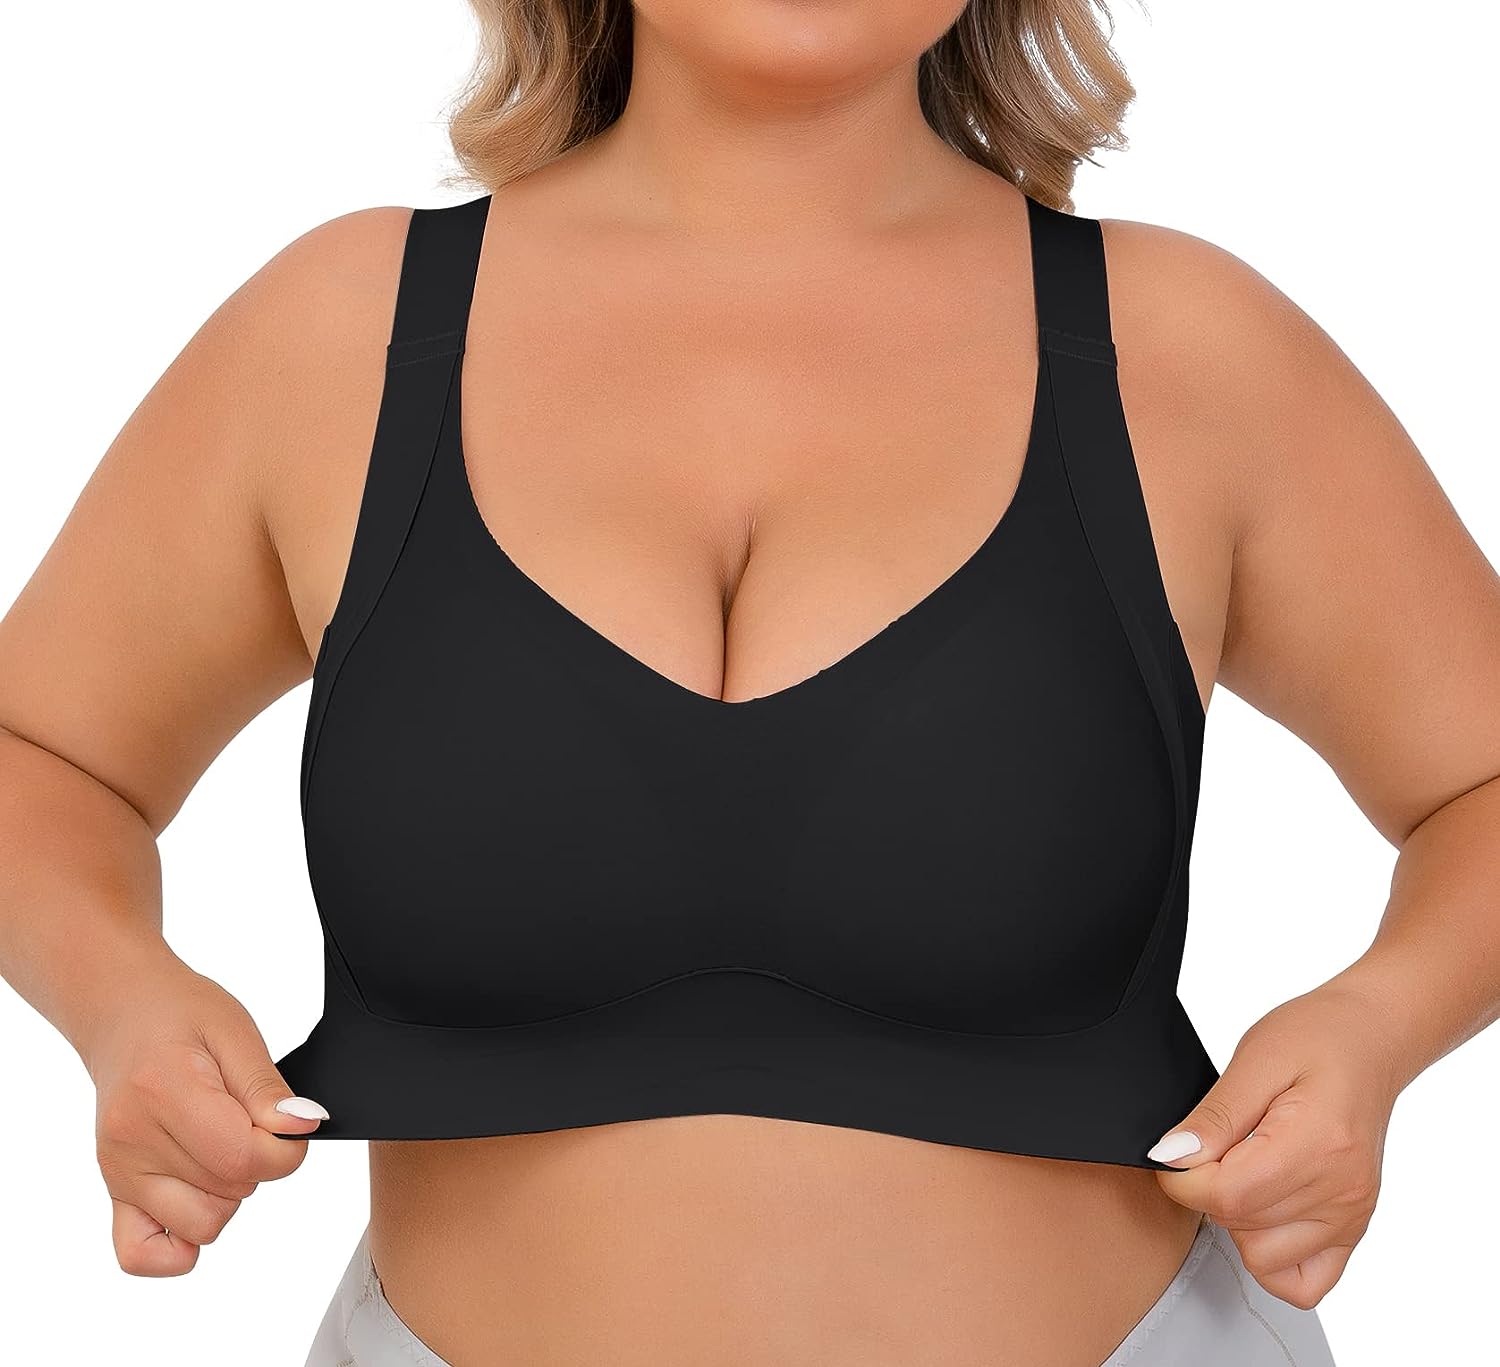 Womens Underbust Comfy Corset Bra Bra Body Shaper With Push Up, Breast  Support, And Posture Correction For Slimming And Shaping From Fashionwest,  $1.59